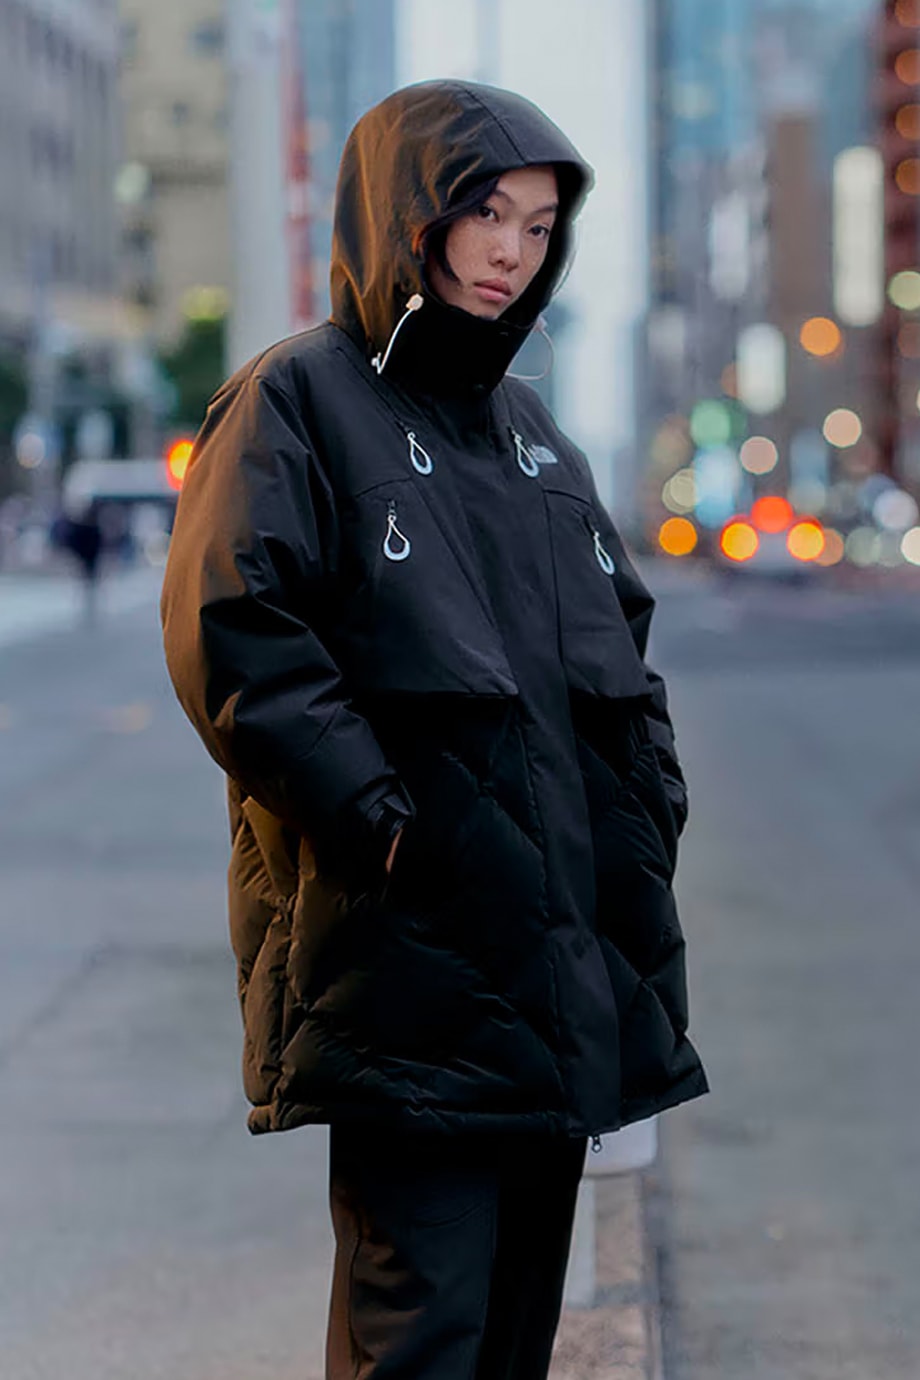 https://image-cdn.hypb.st/https%3A%2F%2Fhypebeast.com%2Fimage%2F2023%2F10%2Fthe-north-face-urban-exploration-fall-winter-2023-timing-notes-collection-release-info-1.jpg?cbr=1&q=90